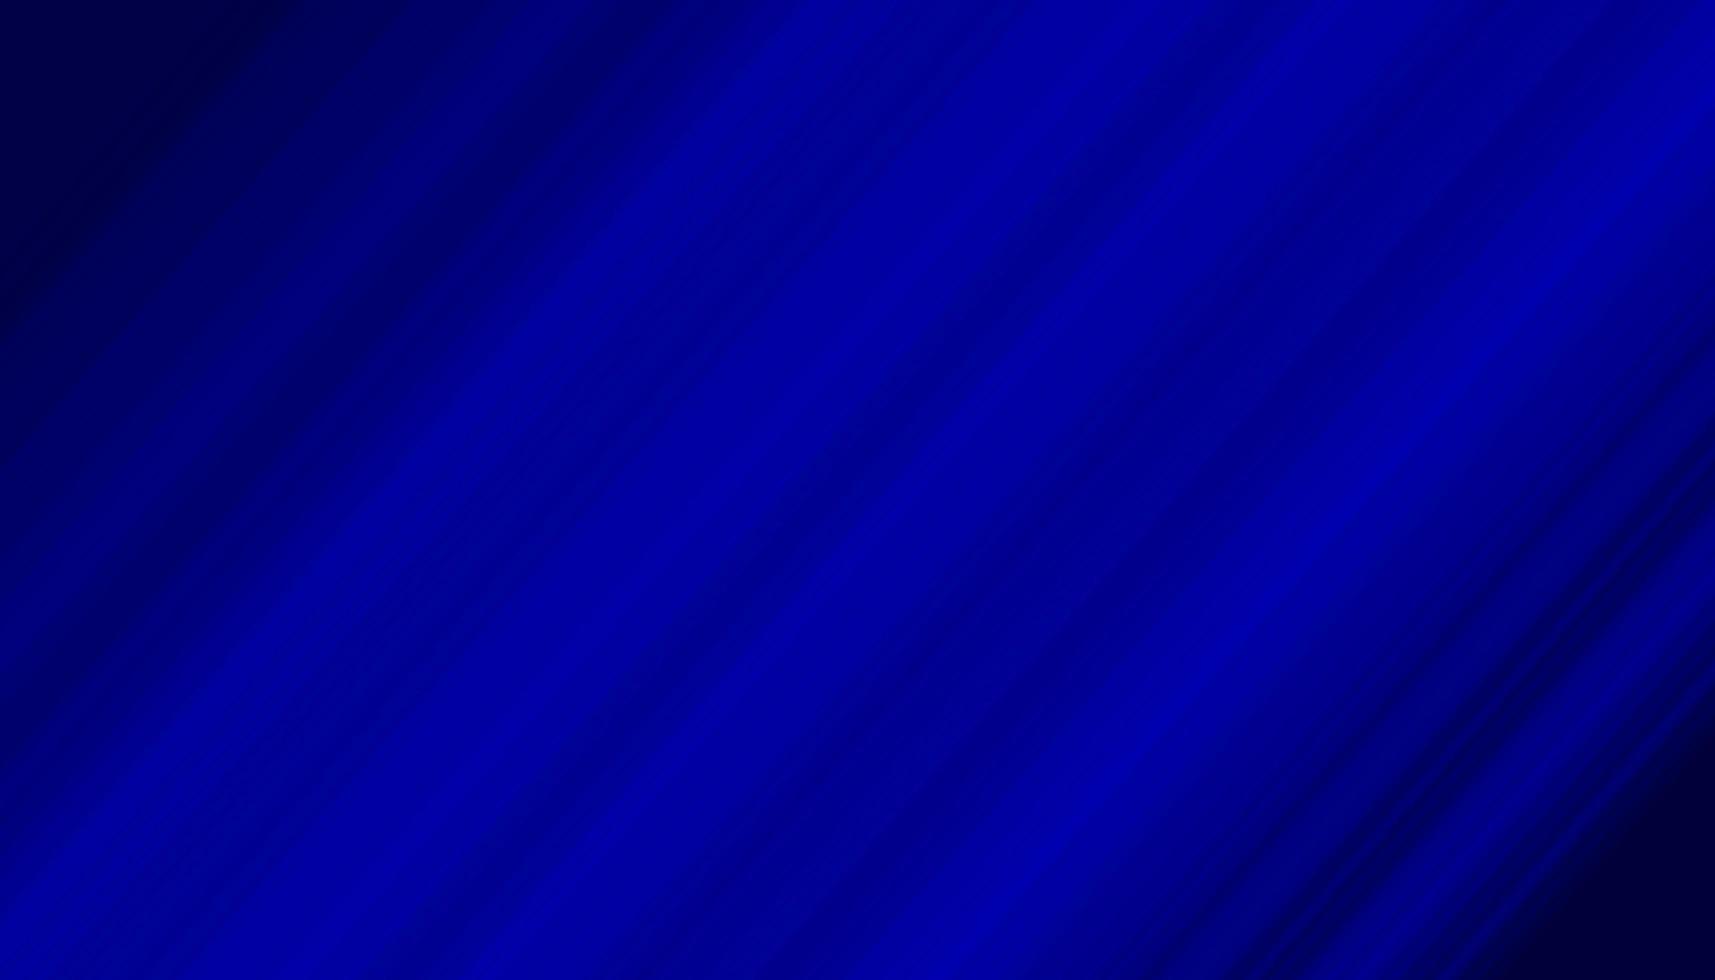 Dark blue abstract background. Expressive creative abstract linear photo